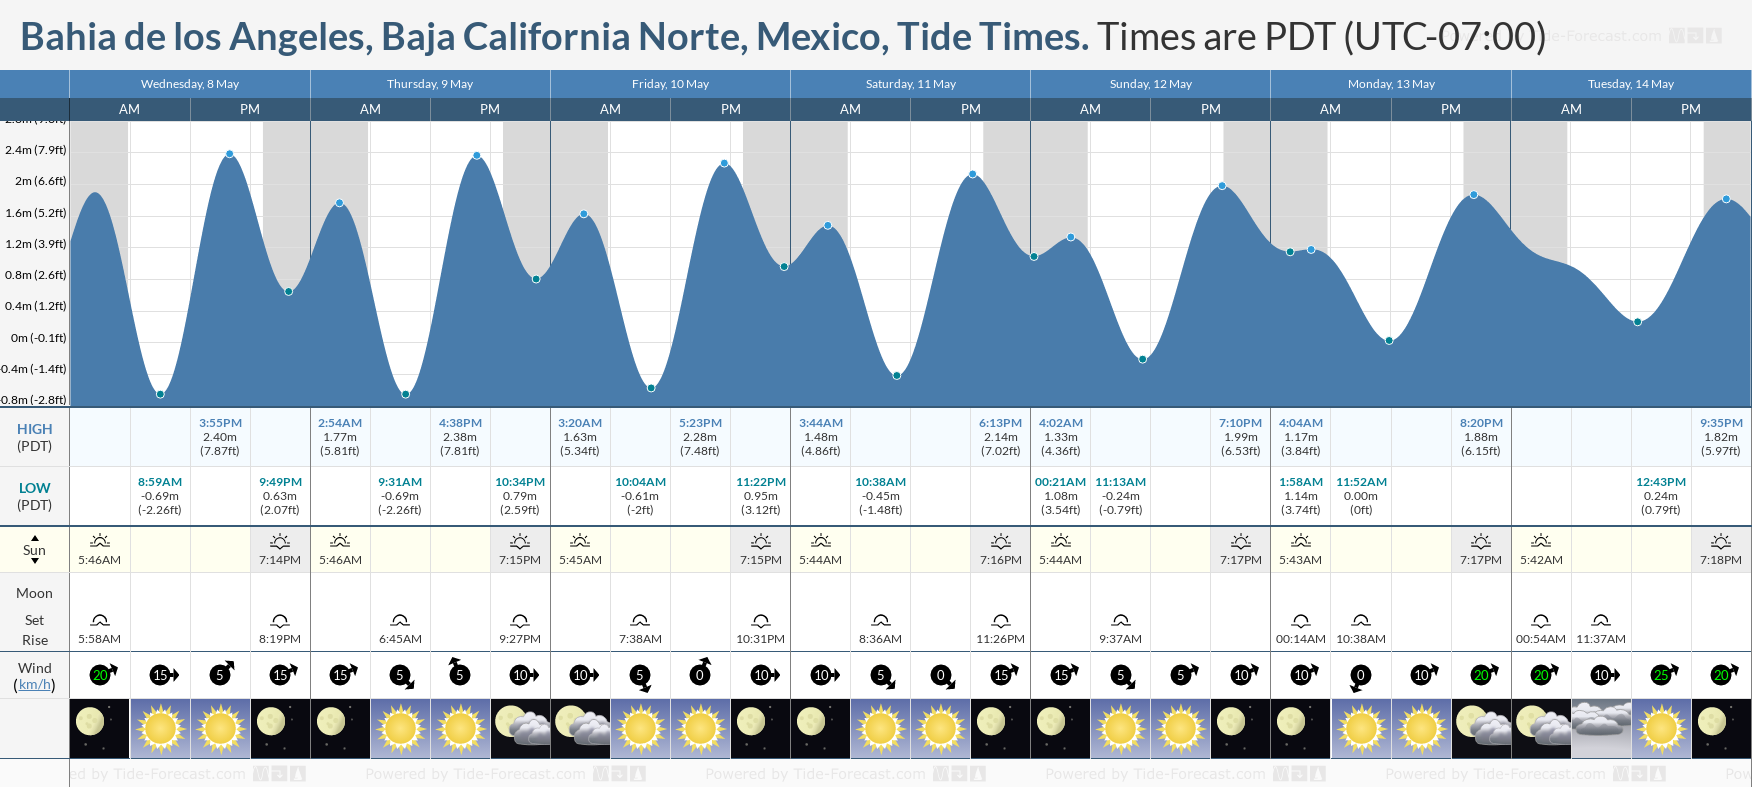 Bahia de los Angeles, Baja California Norte, Mexico Tide Chart including high and low tide tide times for the next 7 days